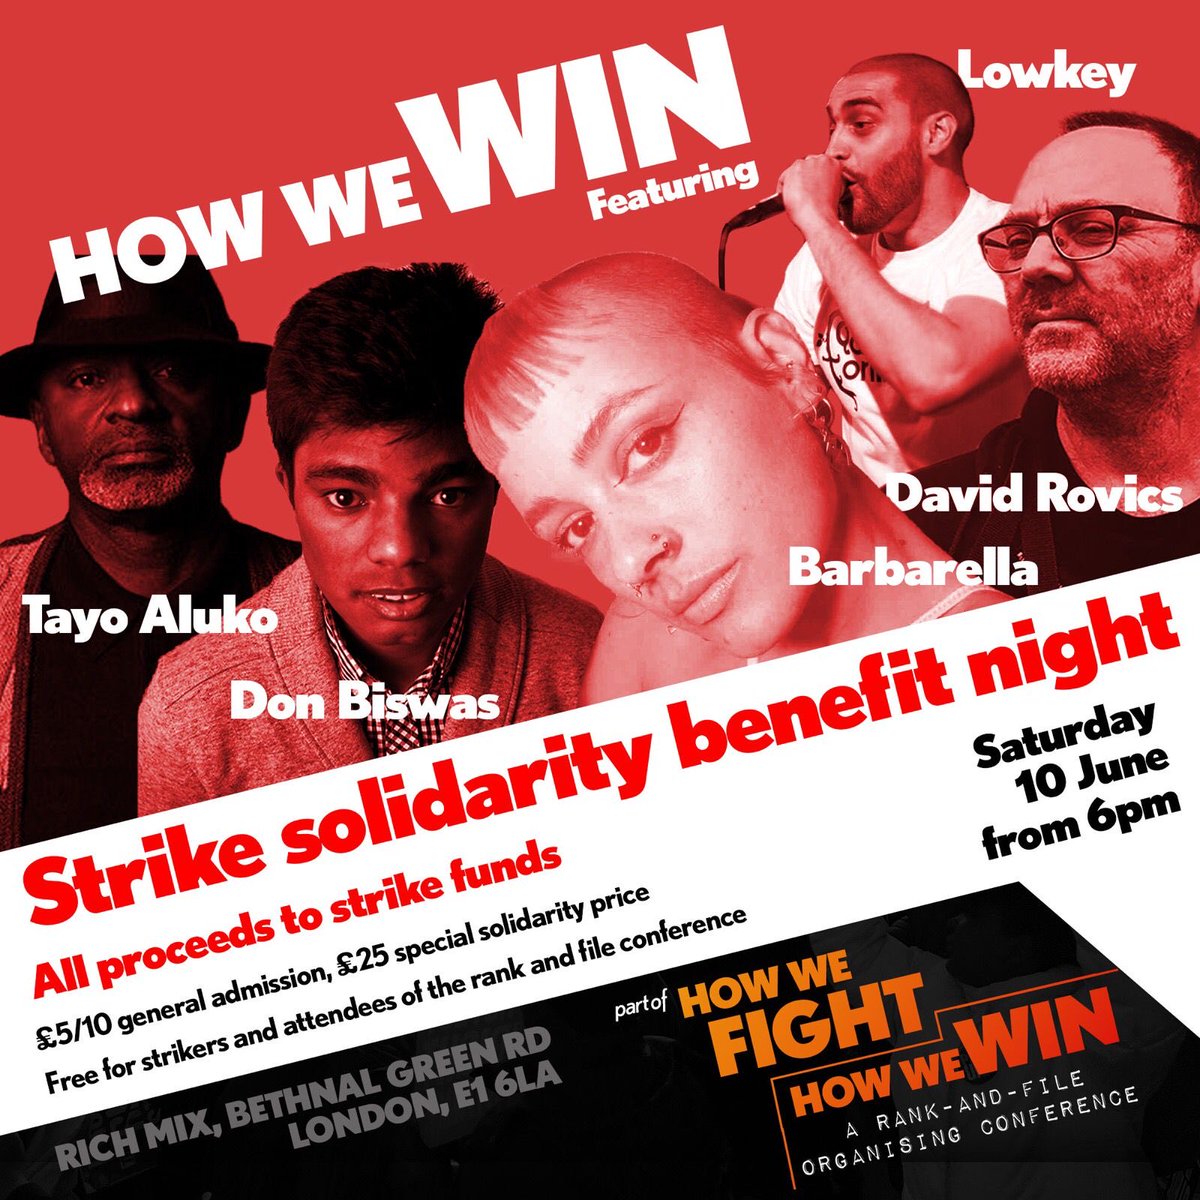 And don't miss the #Strike #Solidarity benefit gig after!